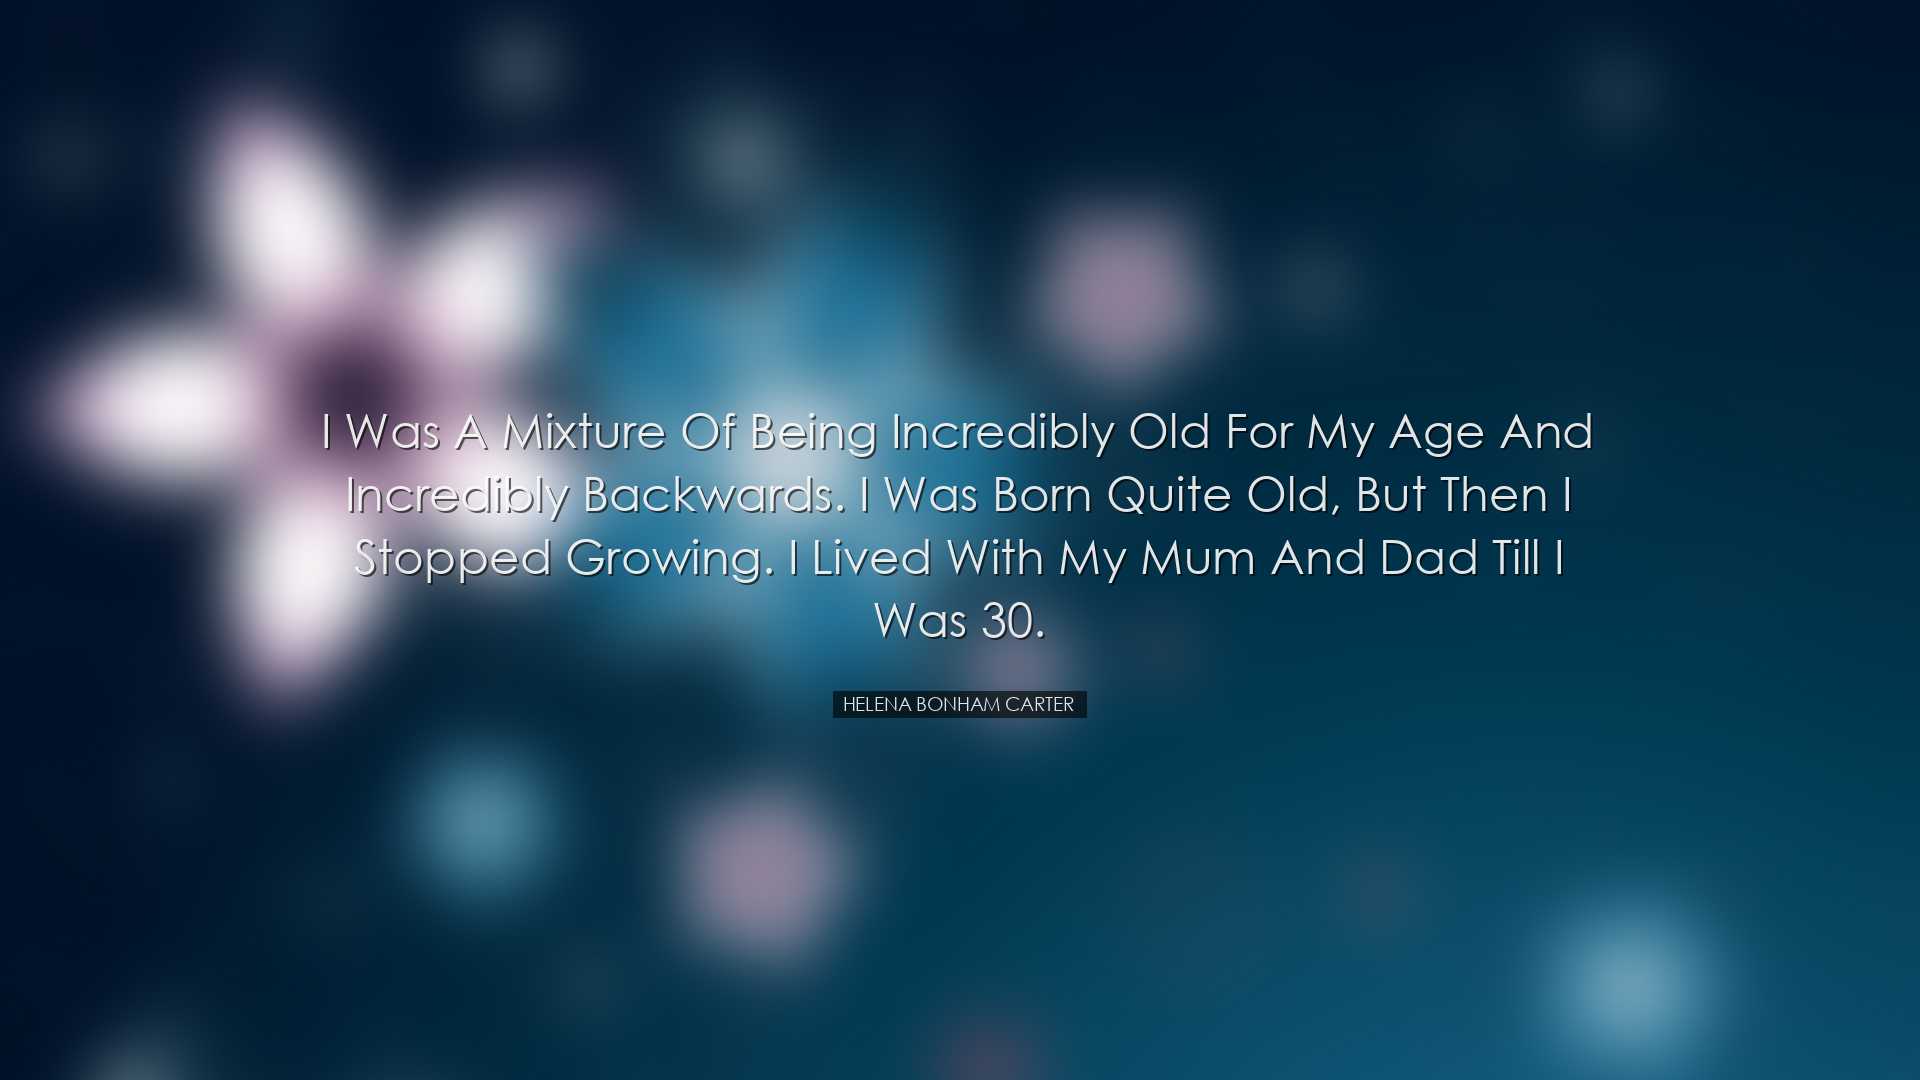 I was a mixture of being incredibly old for my age and incredibly